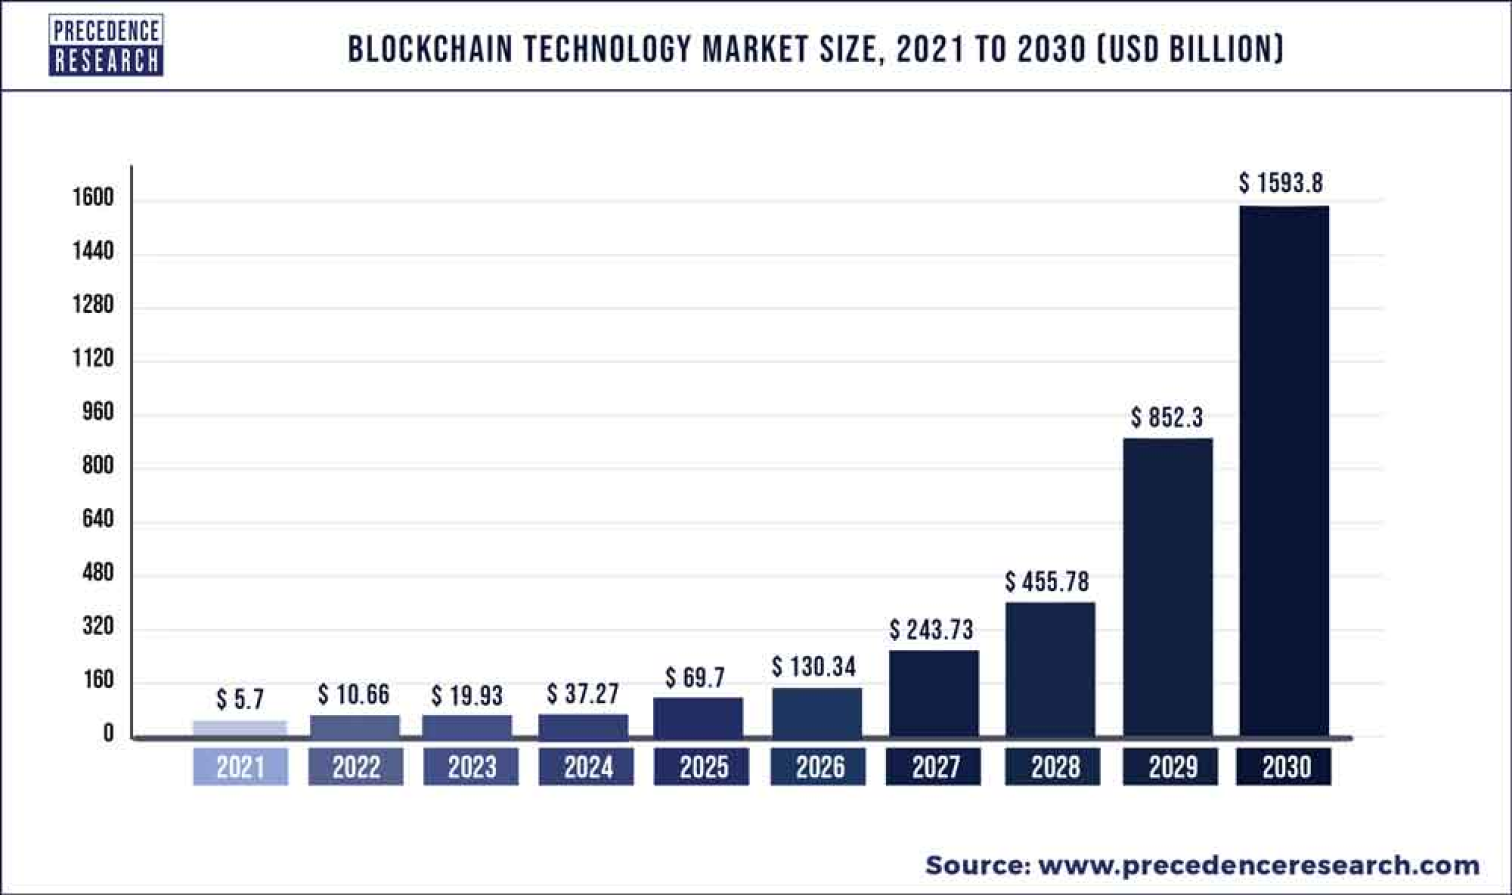 /assets/1-img/content/blockchain_market_size_forecast-2021-to-2030.png